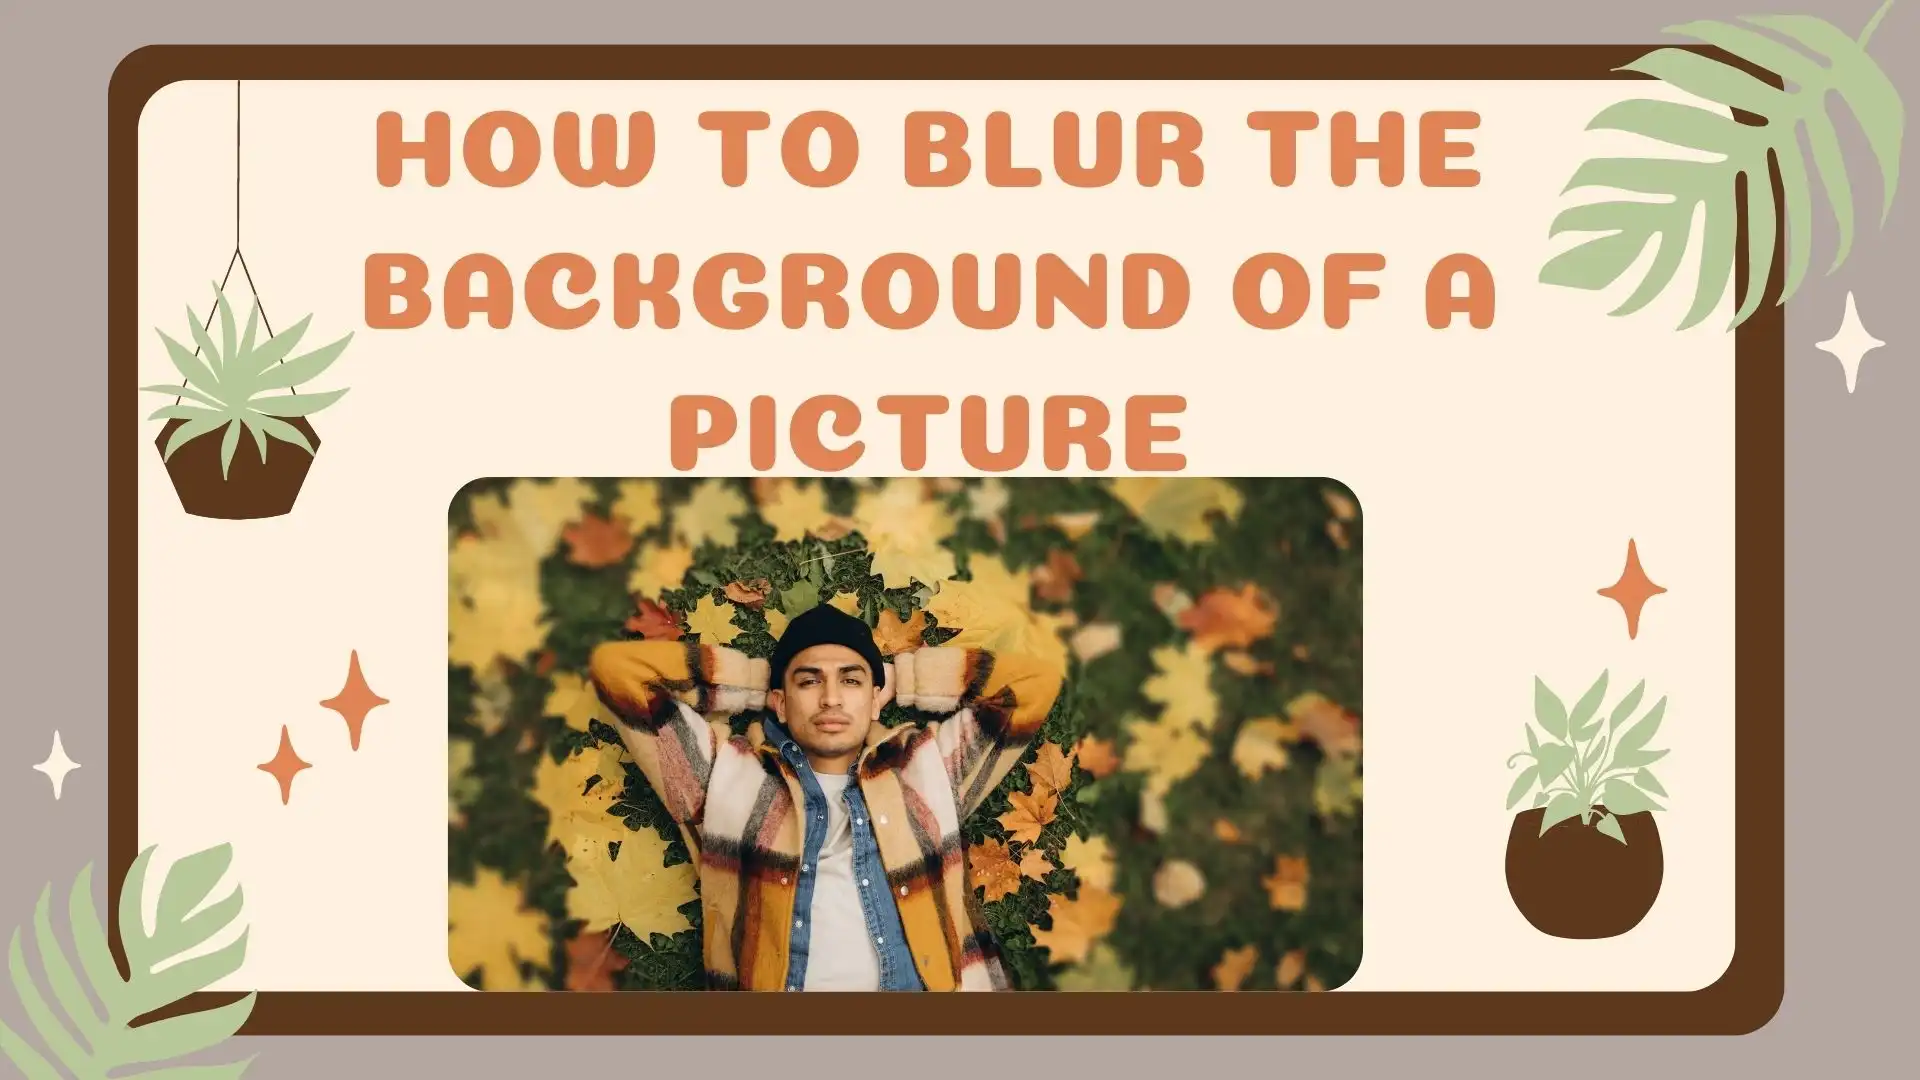 How to Blur the Background of a Picture on iPhone, Android, or PC